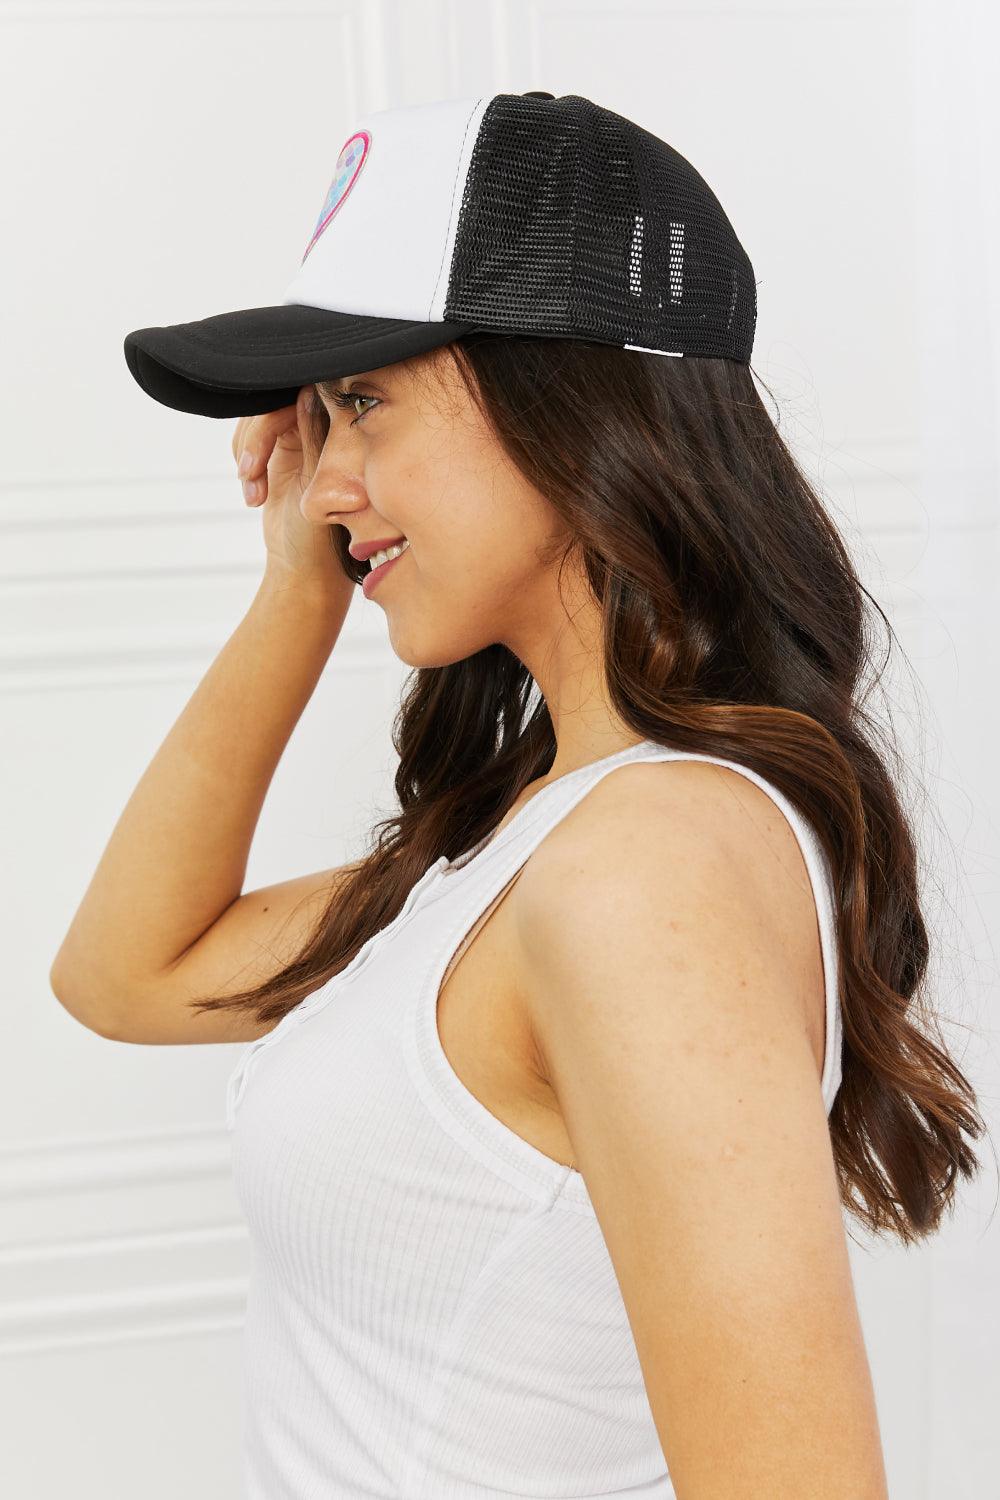 Fame Falling For You Trucker Hat in Black - Lab Fashion, Home & Health